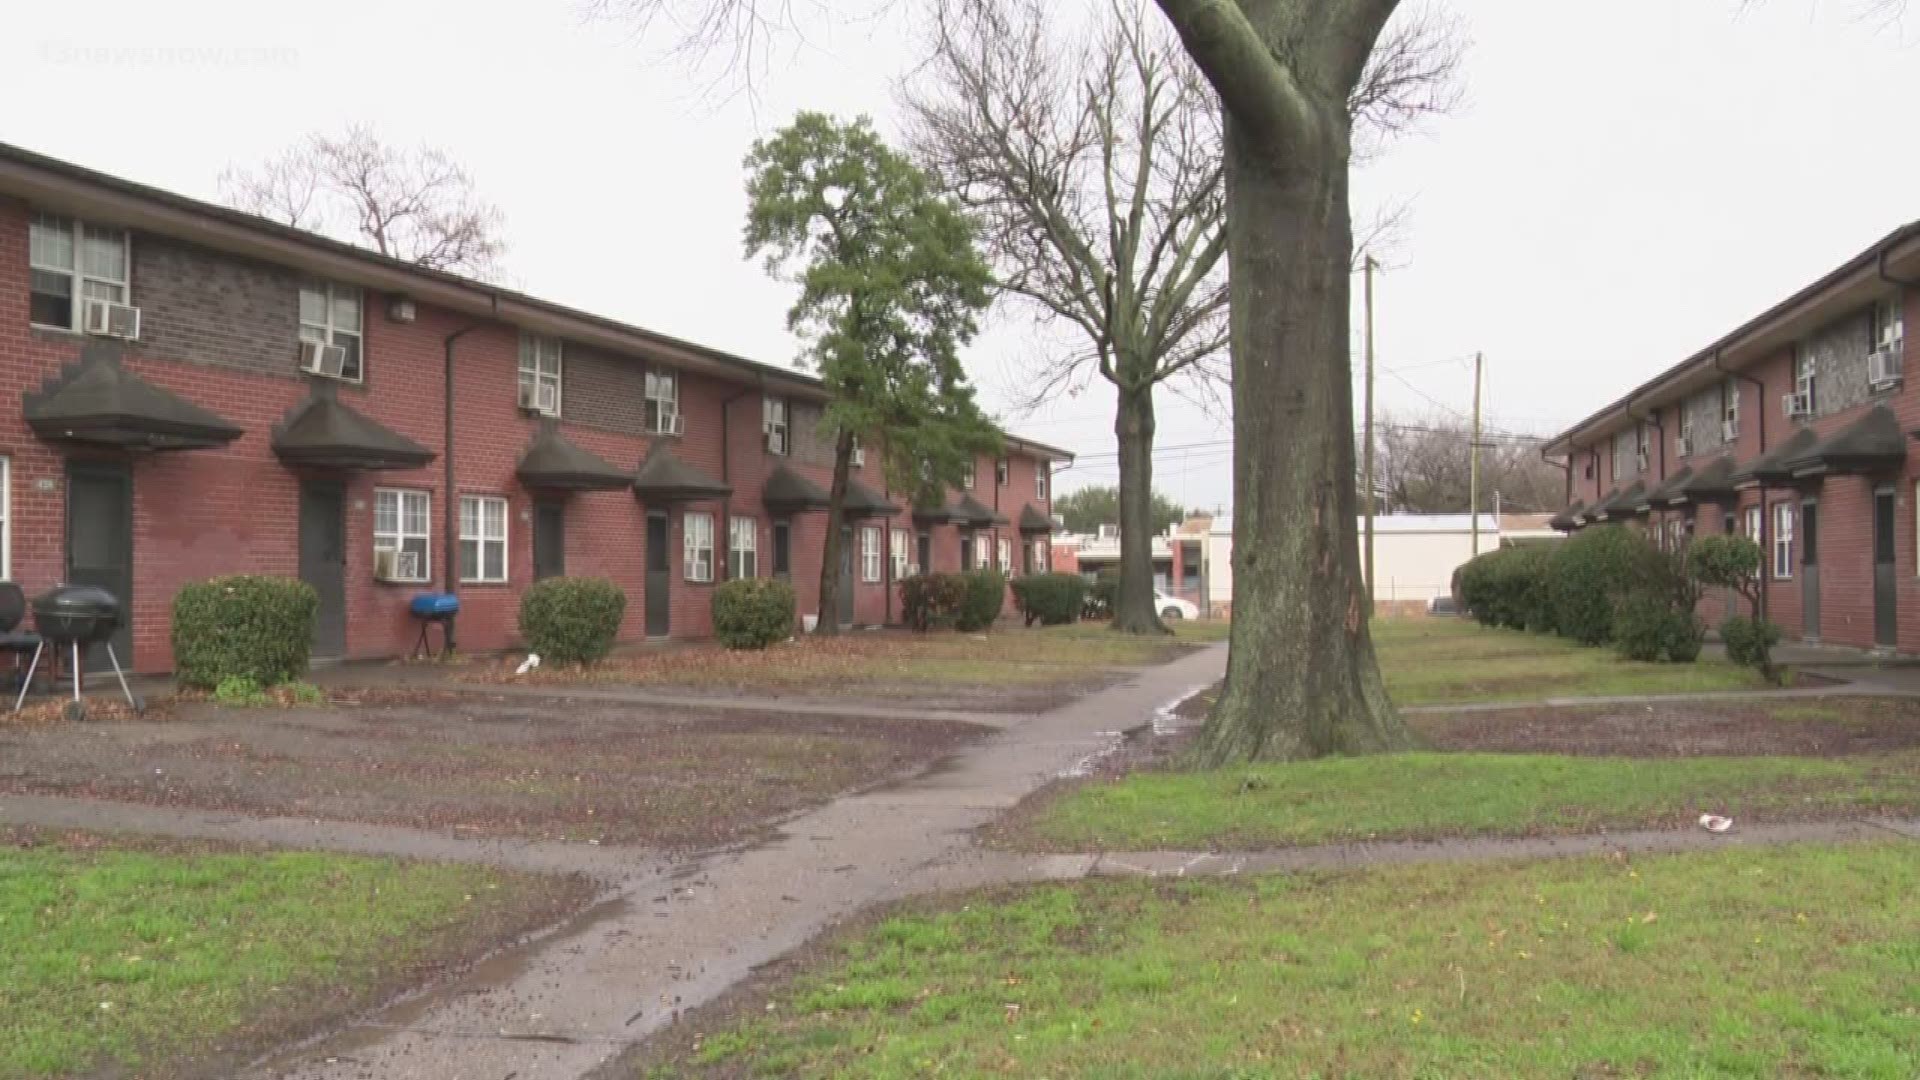 A new lawsuit claims that Norfolk is unfairly targeting poor, black families with its St. Paul's redevelopment. 13News Now Dana Smith has more.